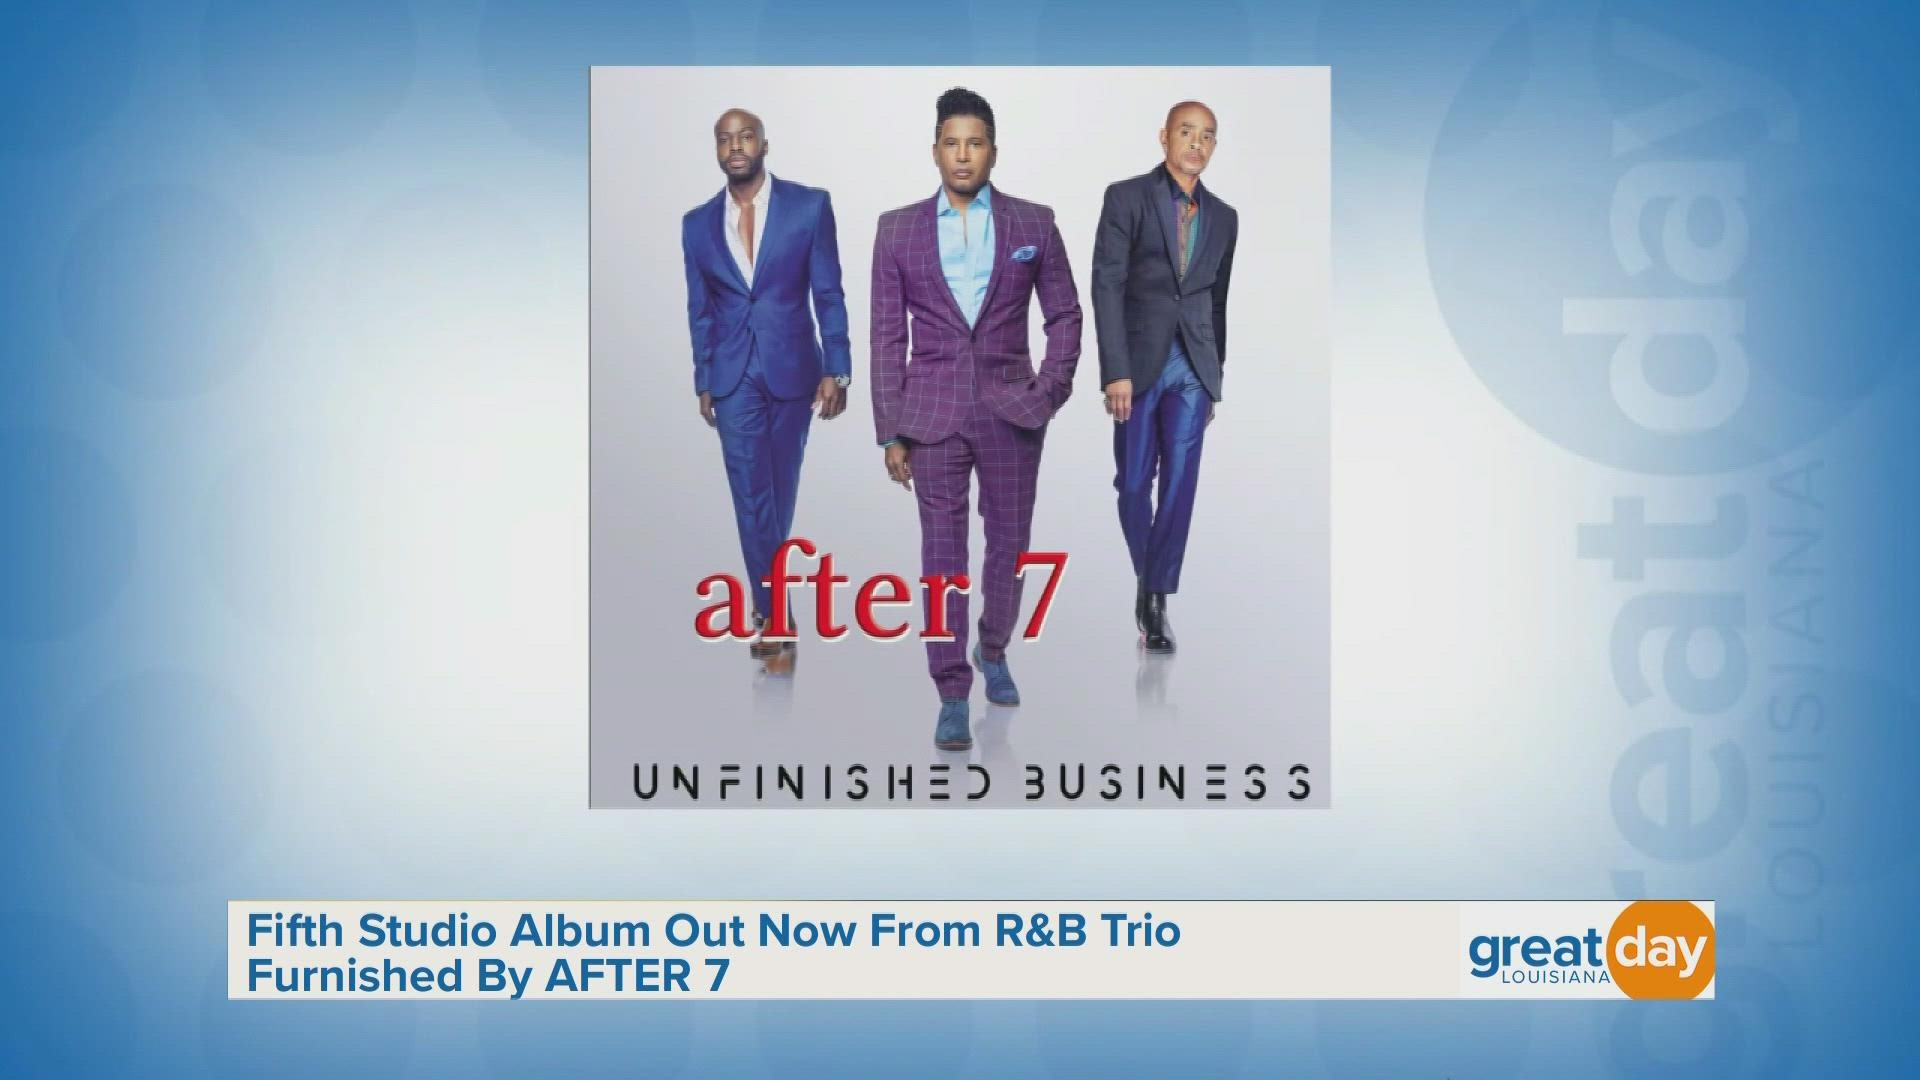 R&B group "AFTER 7" shared details about their new album and performed their latest hit, "Bittersweet."